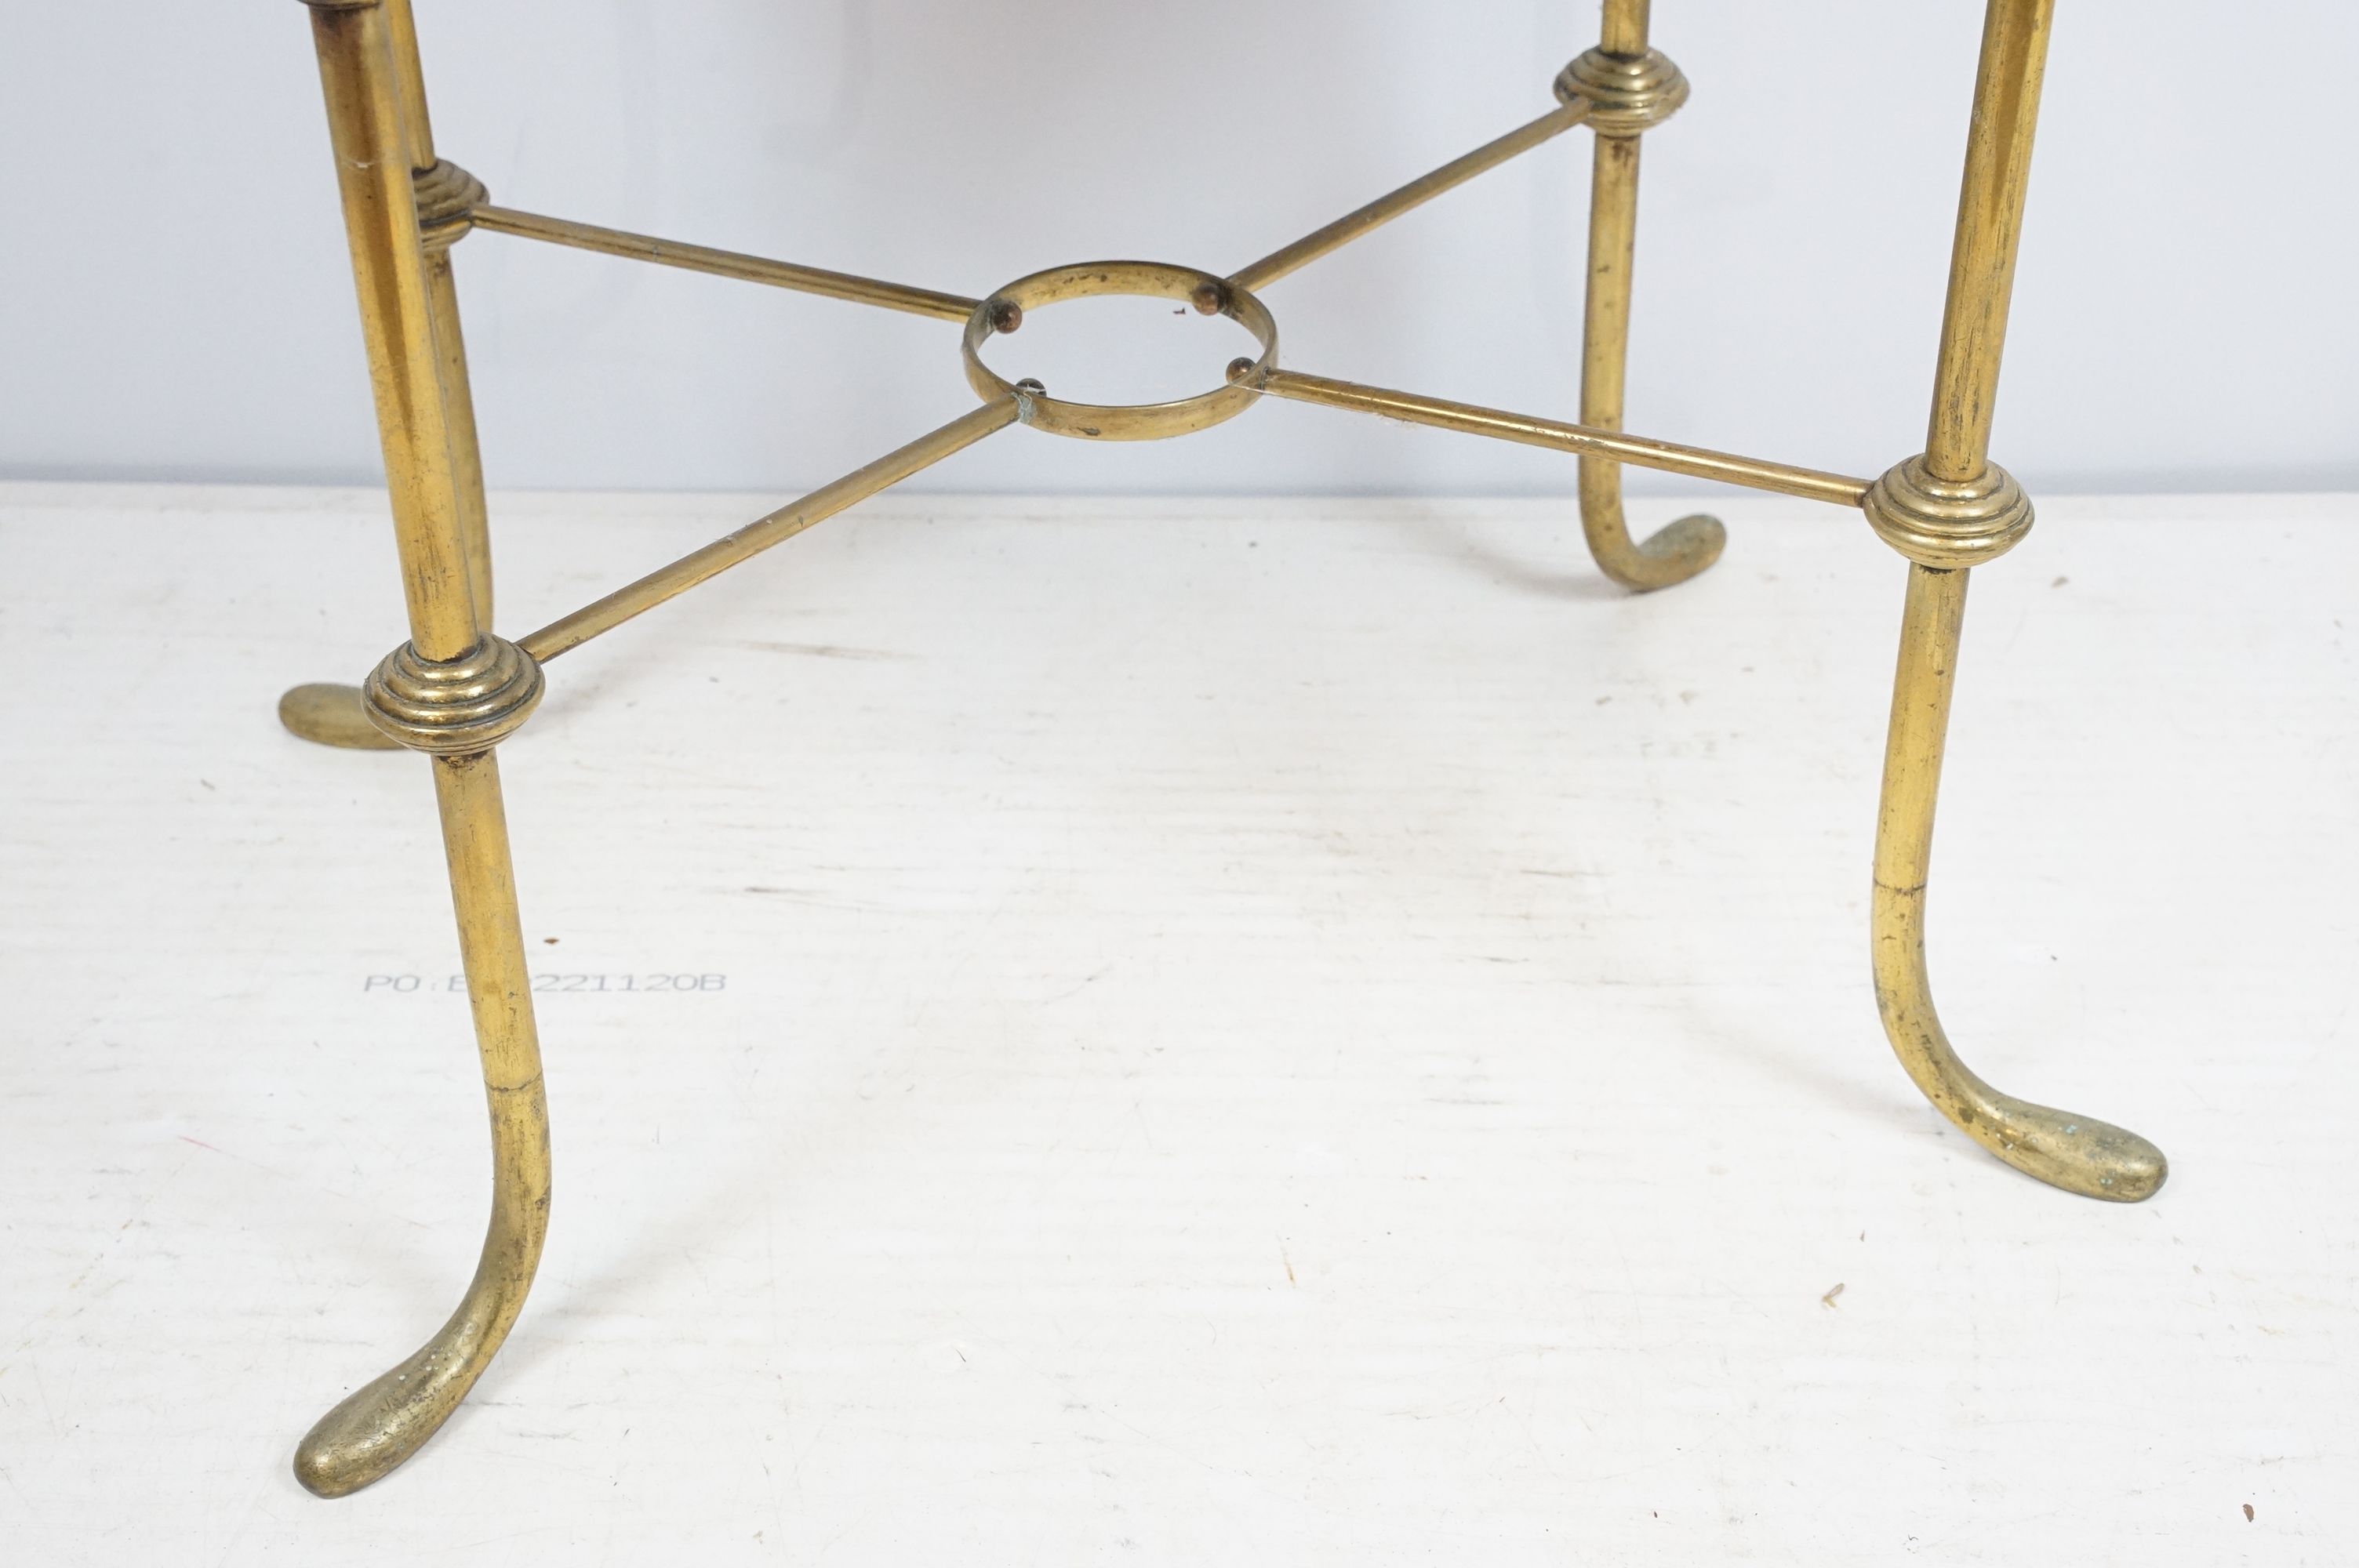 Mahogany two tier table with brass supports and x-stretcher, 80cm high x 45cm wide x 36cm deep - Image 4 of 6